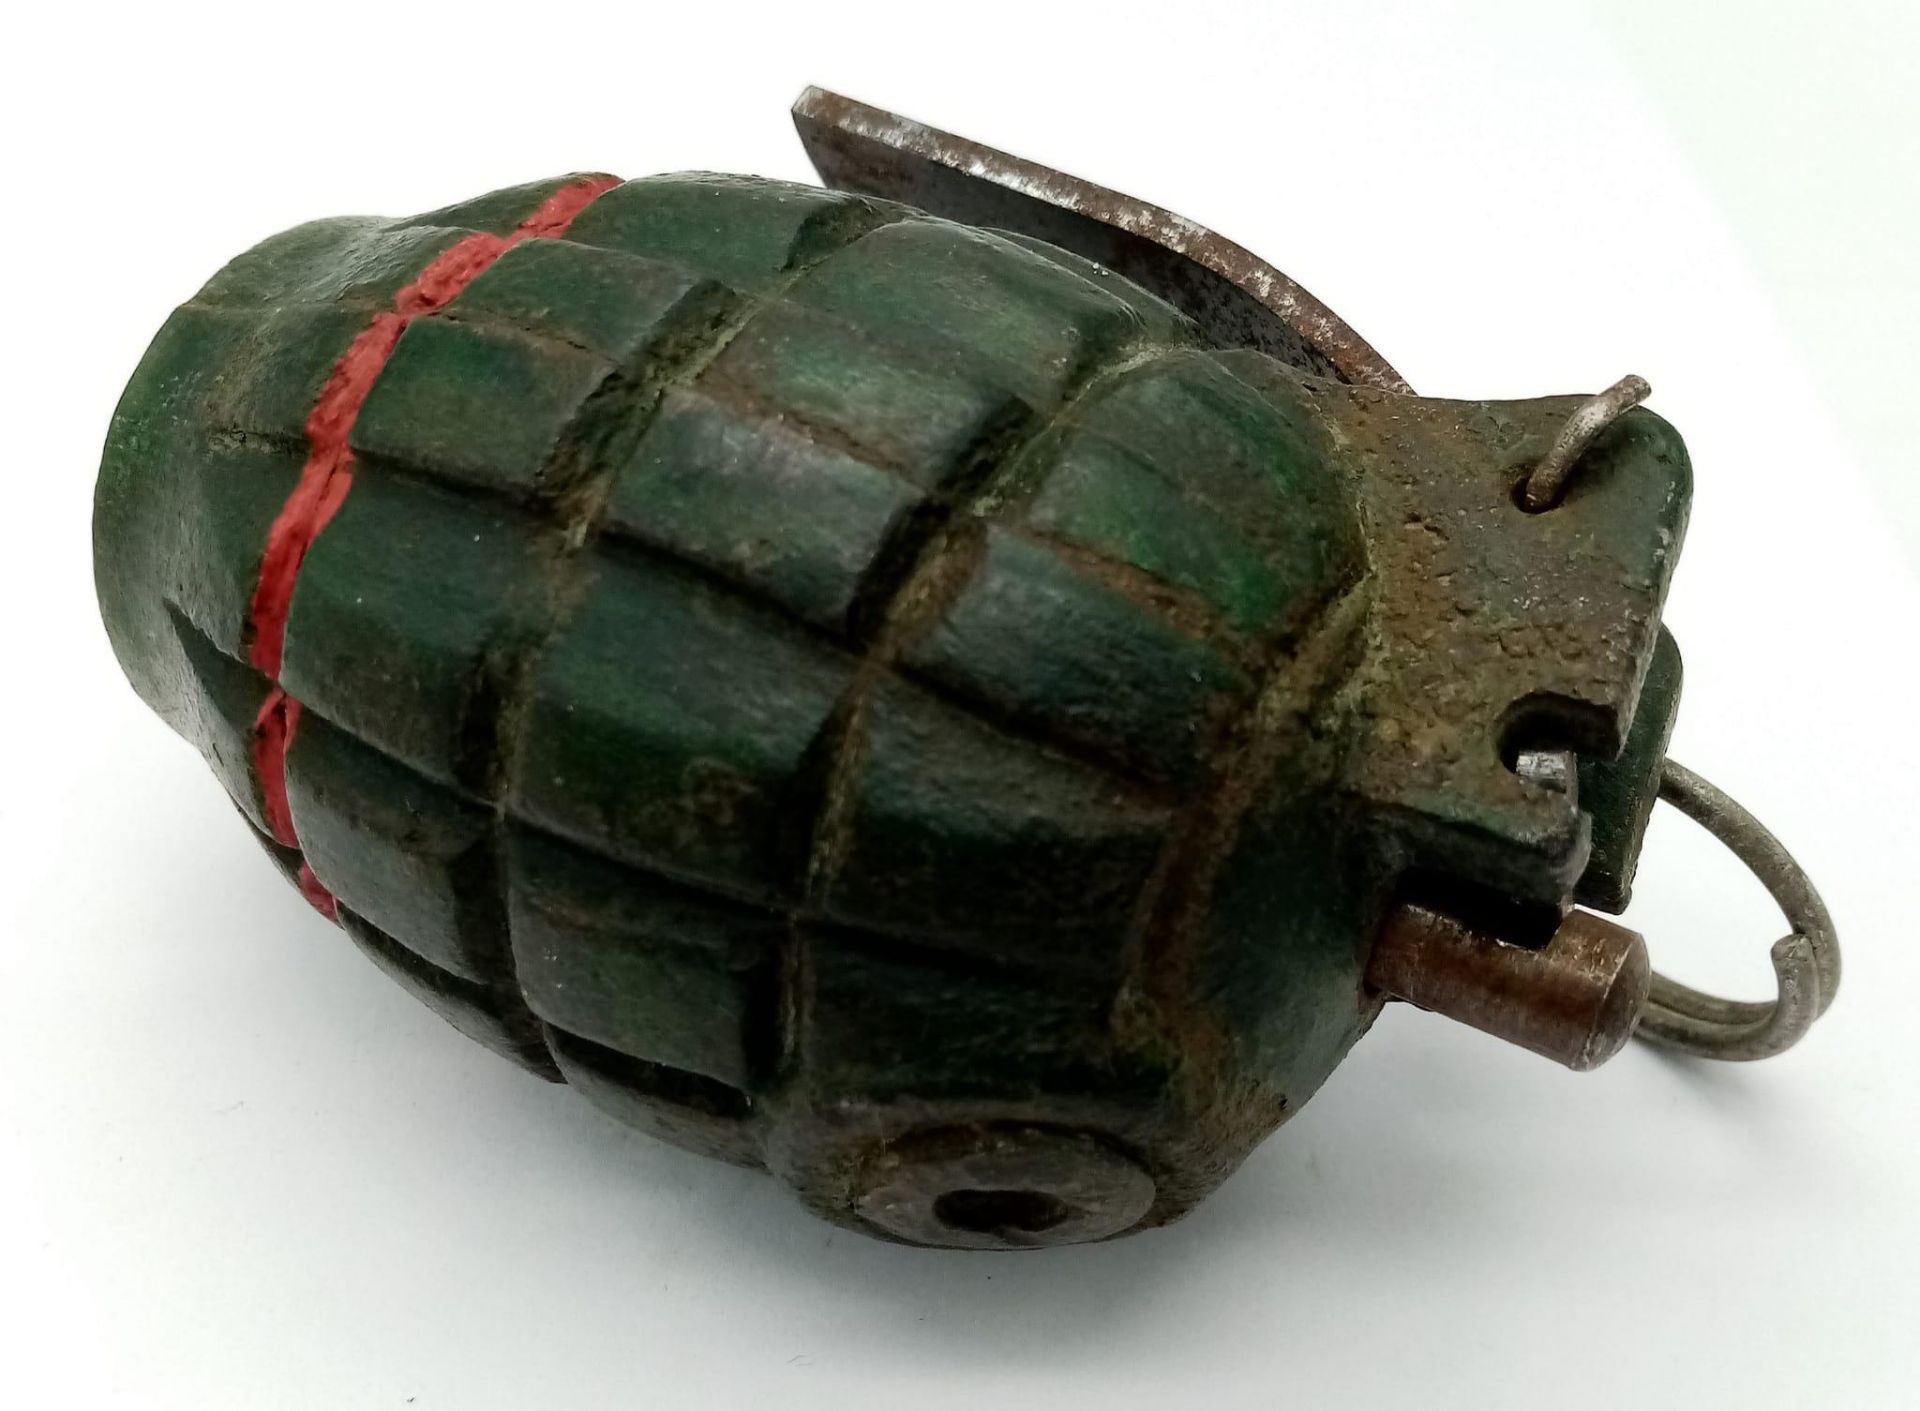 INERT Israeli Made No 36 Mills Grenade. Circa late 1940s-Mid 1950’s. UK Mainland Sales Only. - Image 4 of 6